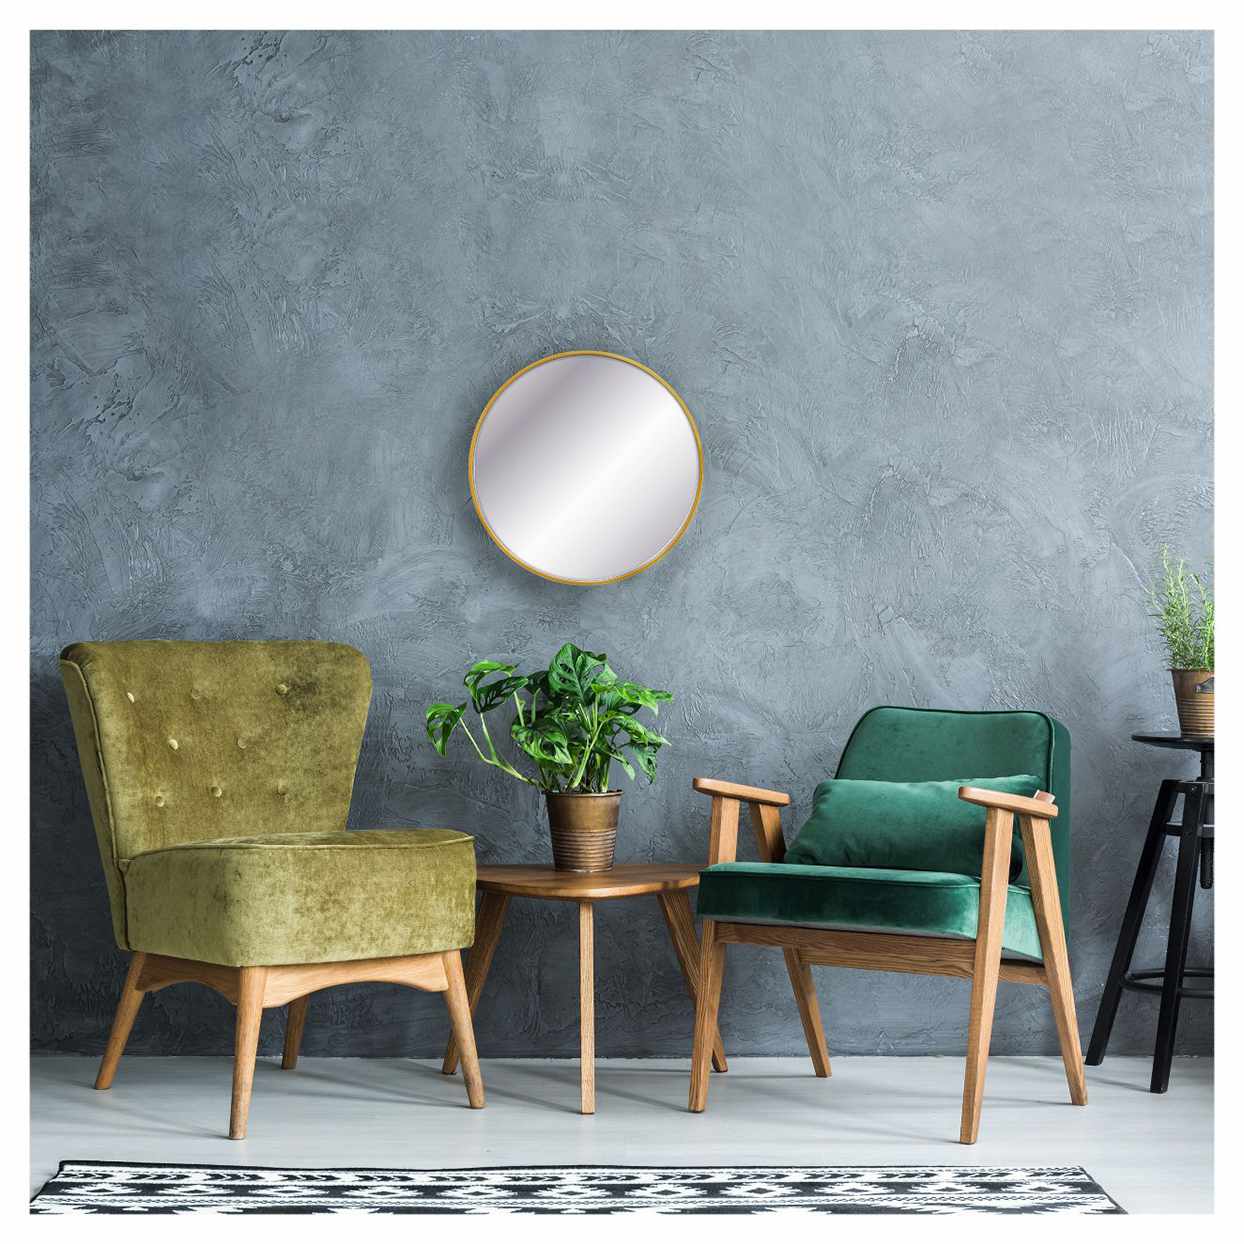 round gold mirror on wall above two green chairs and side table